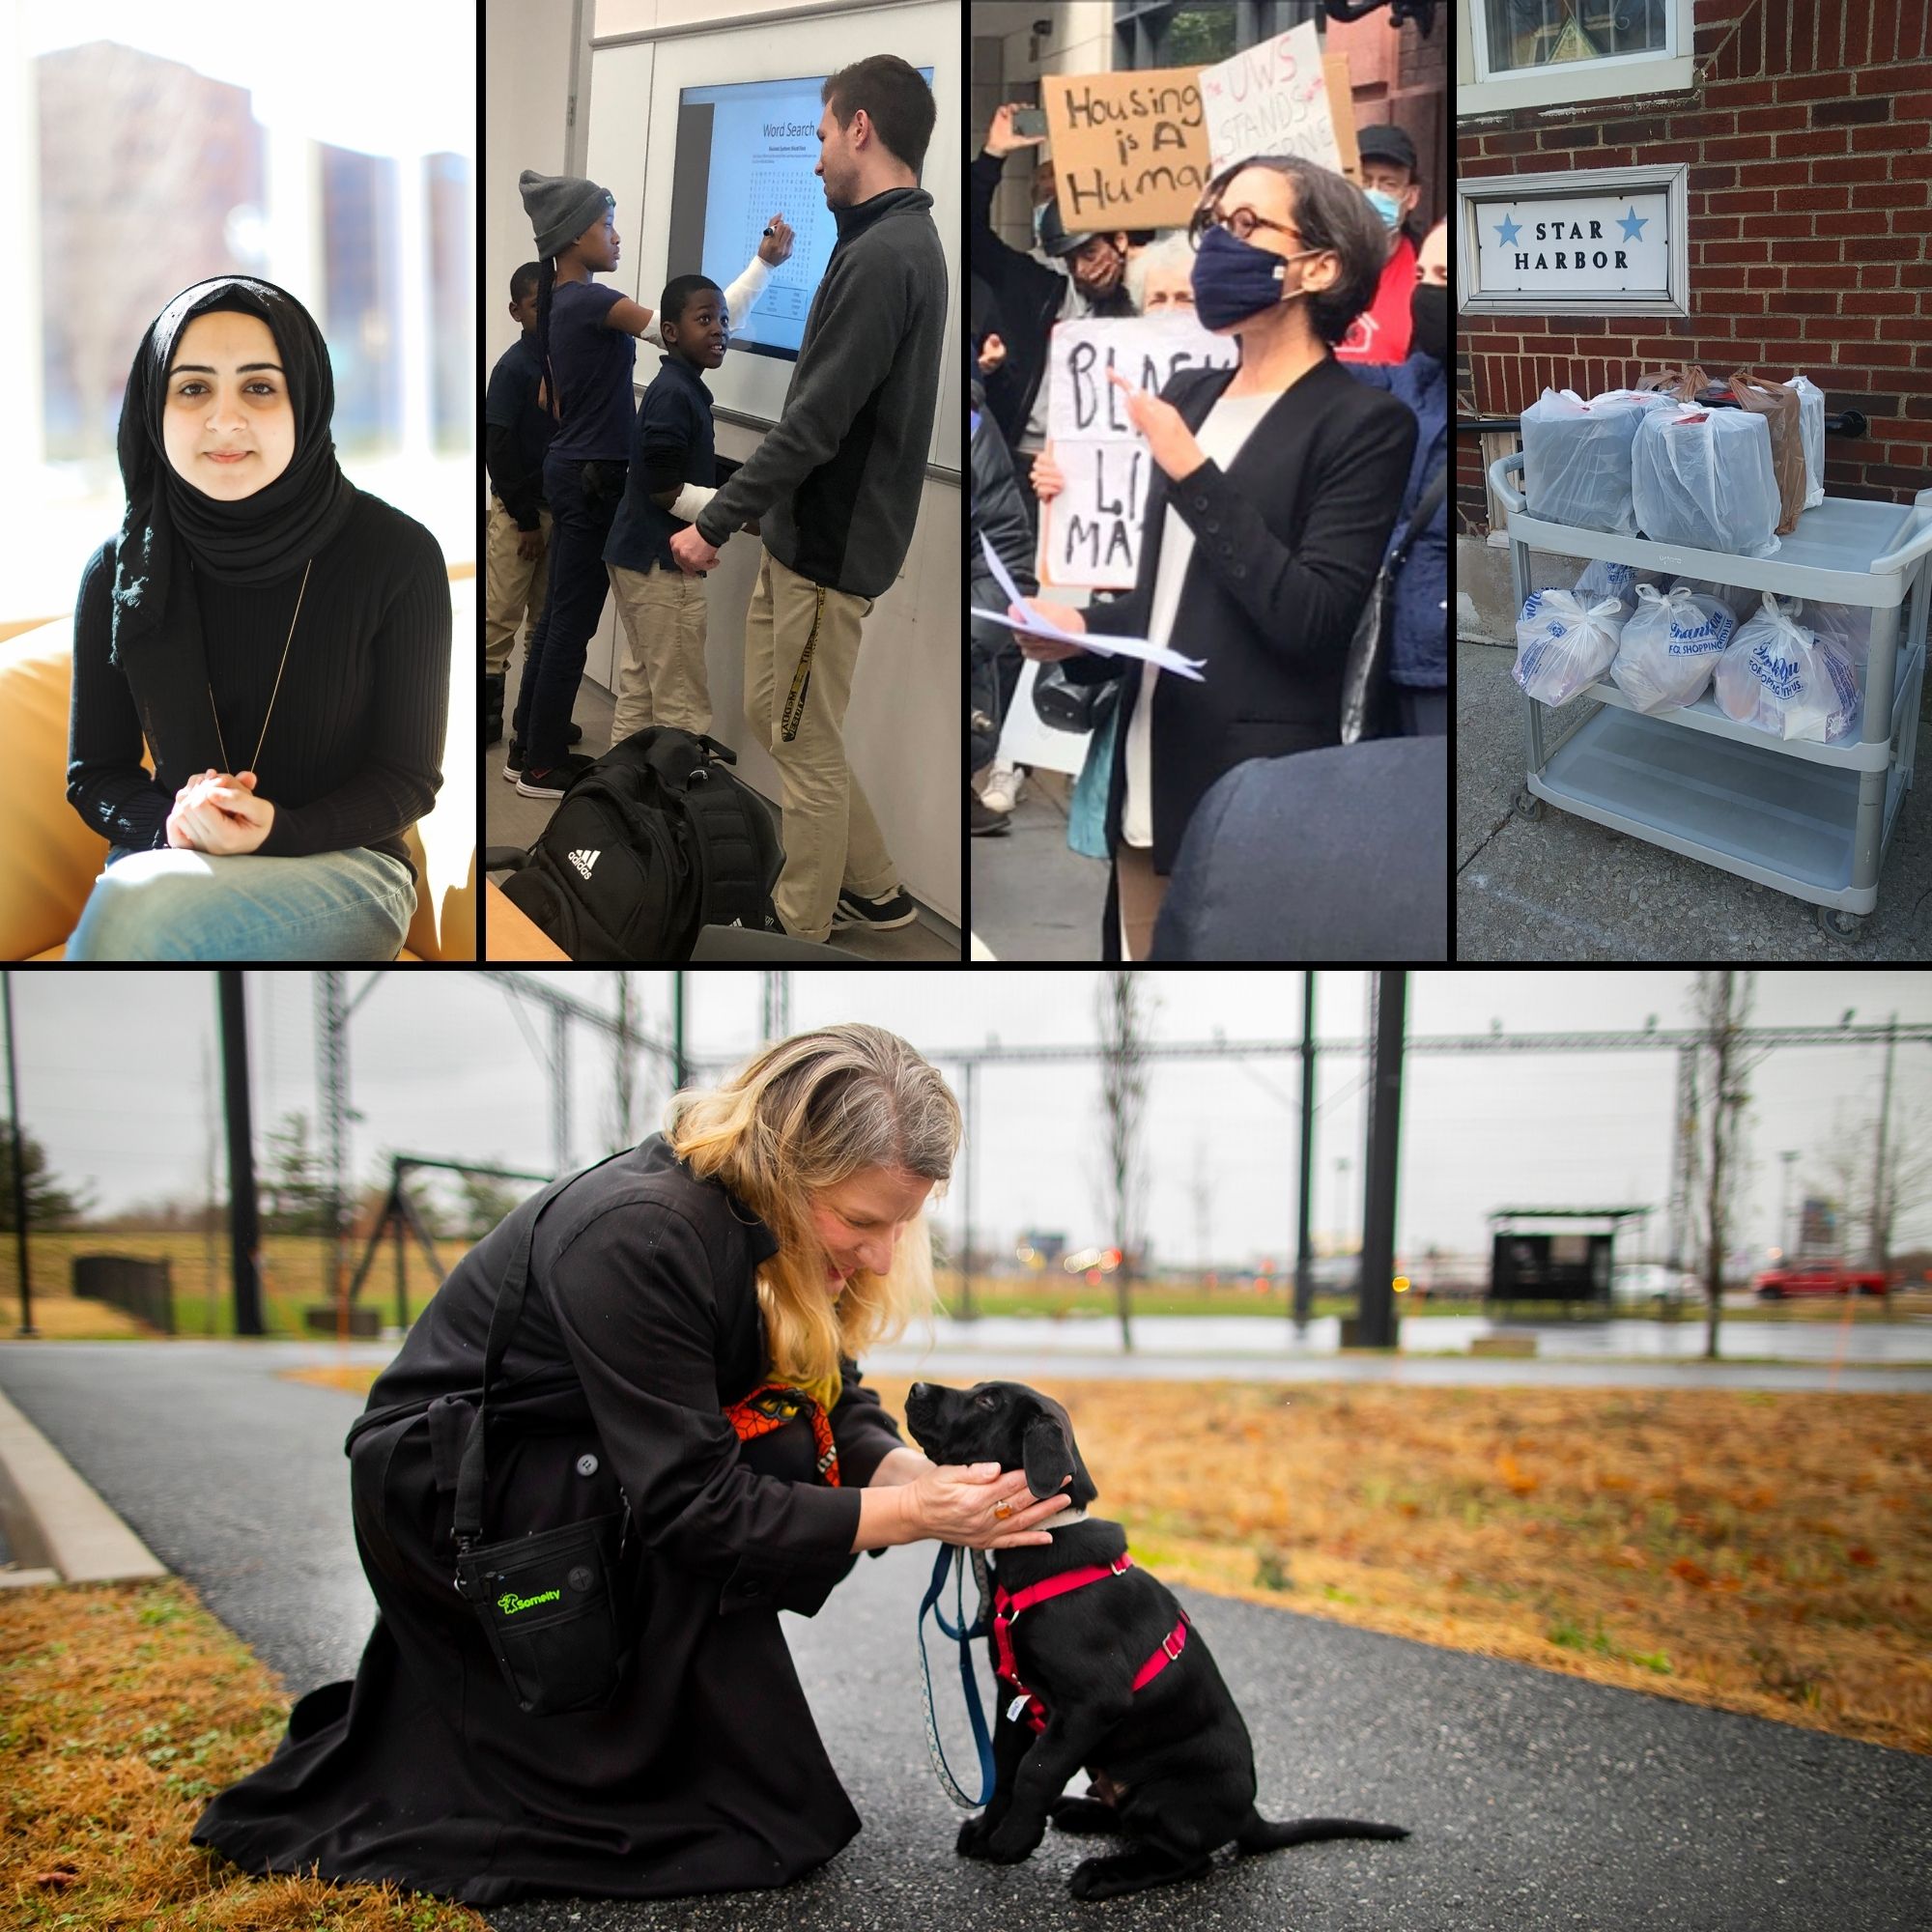 Top row, left to right, Fatima Al Rashed, Person wearing a face mask standing in a crowd of people holding protest signs, a volunteer with students at Comegys School, and shopping bags of donated items on a wheeled cart on a sidewalk outside a senior center. Bottom image Heather Calvert kneels down to pet her foster dog.